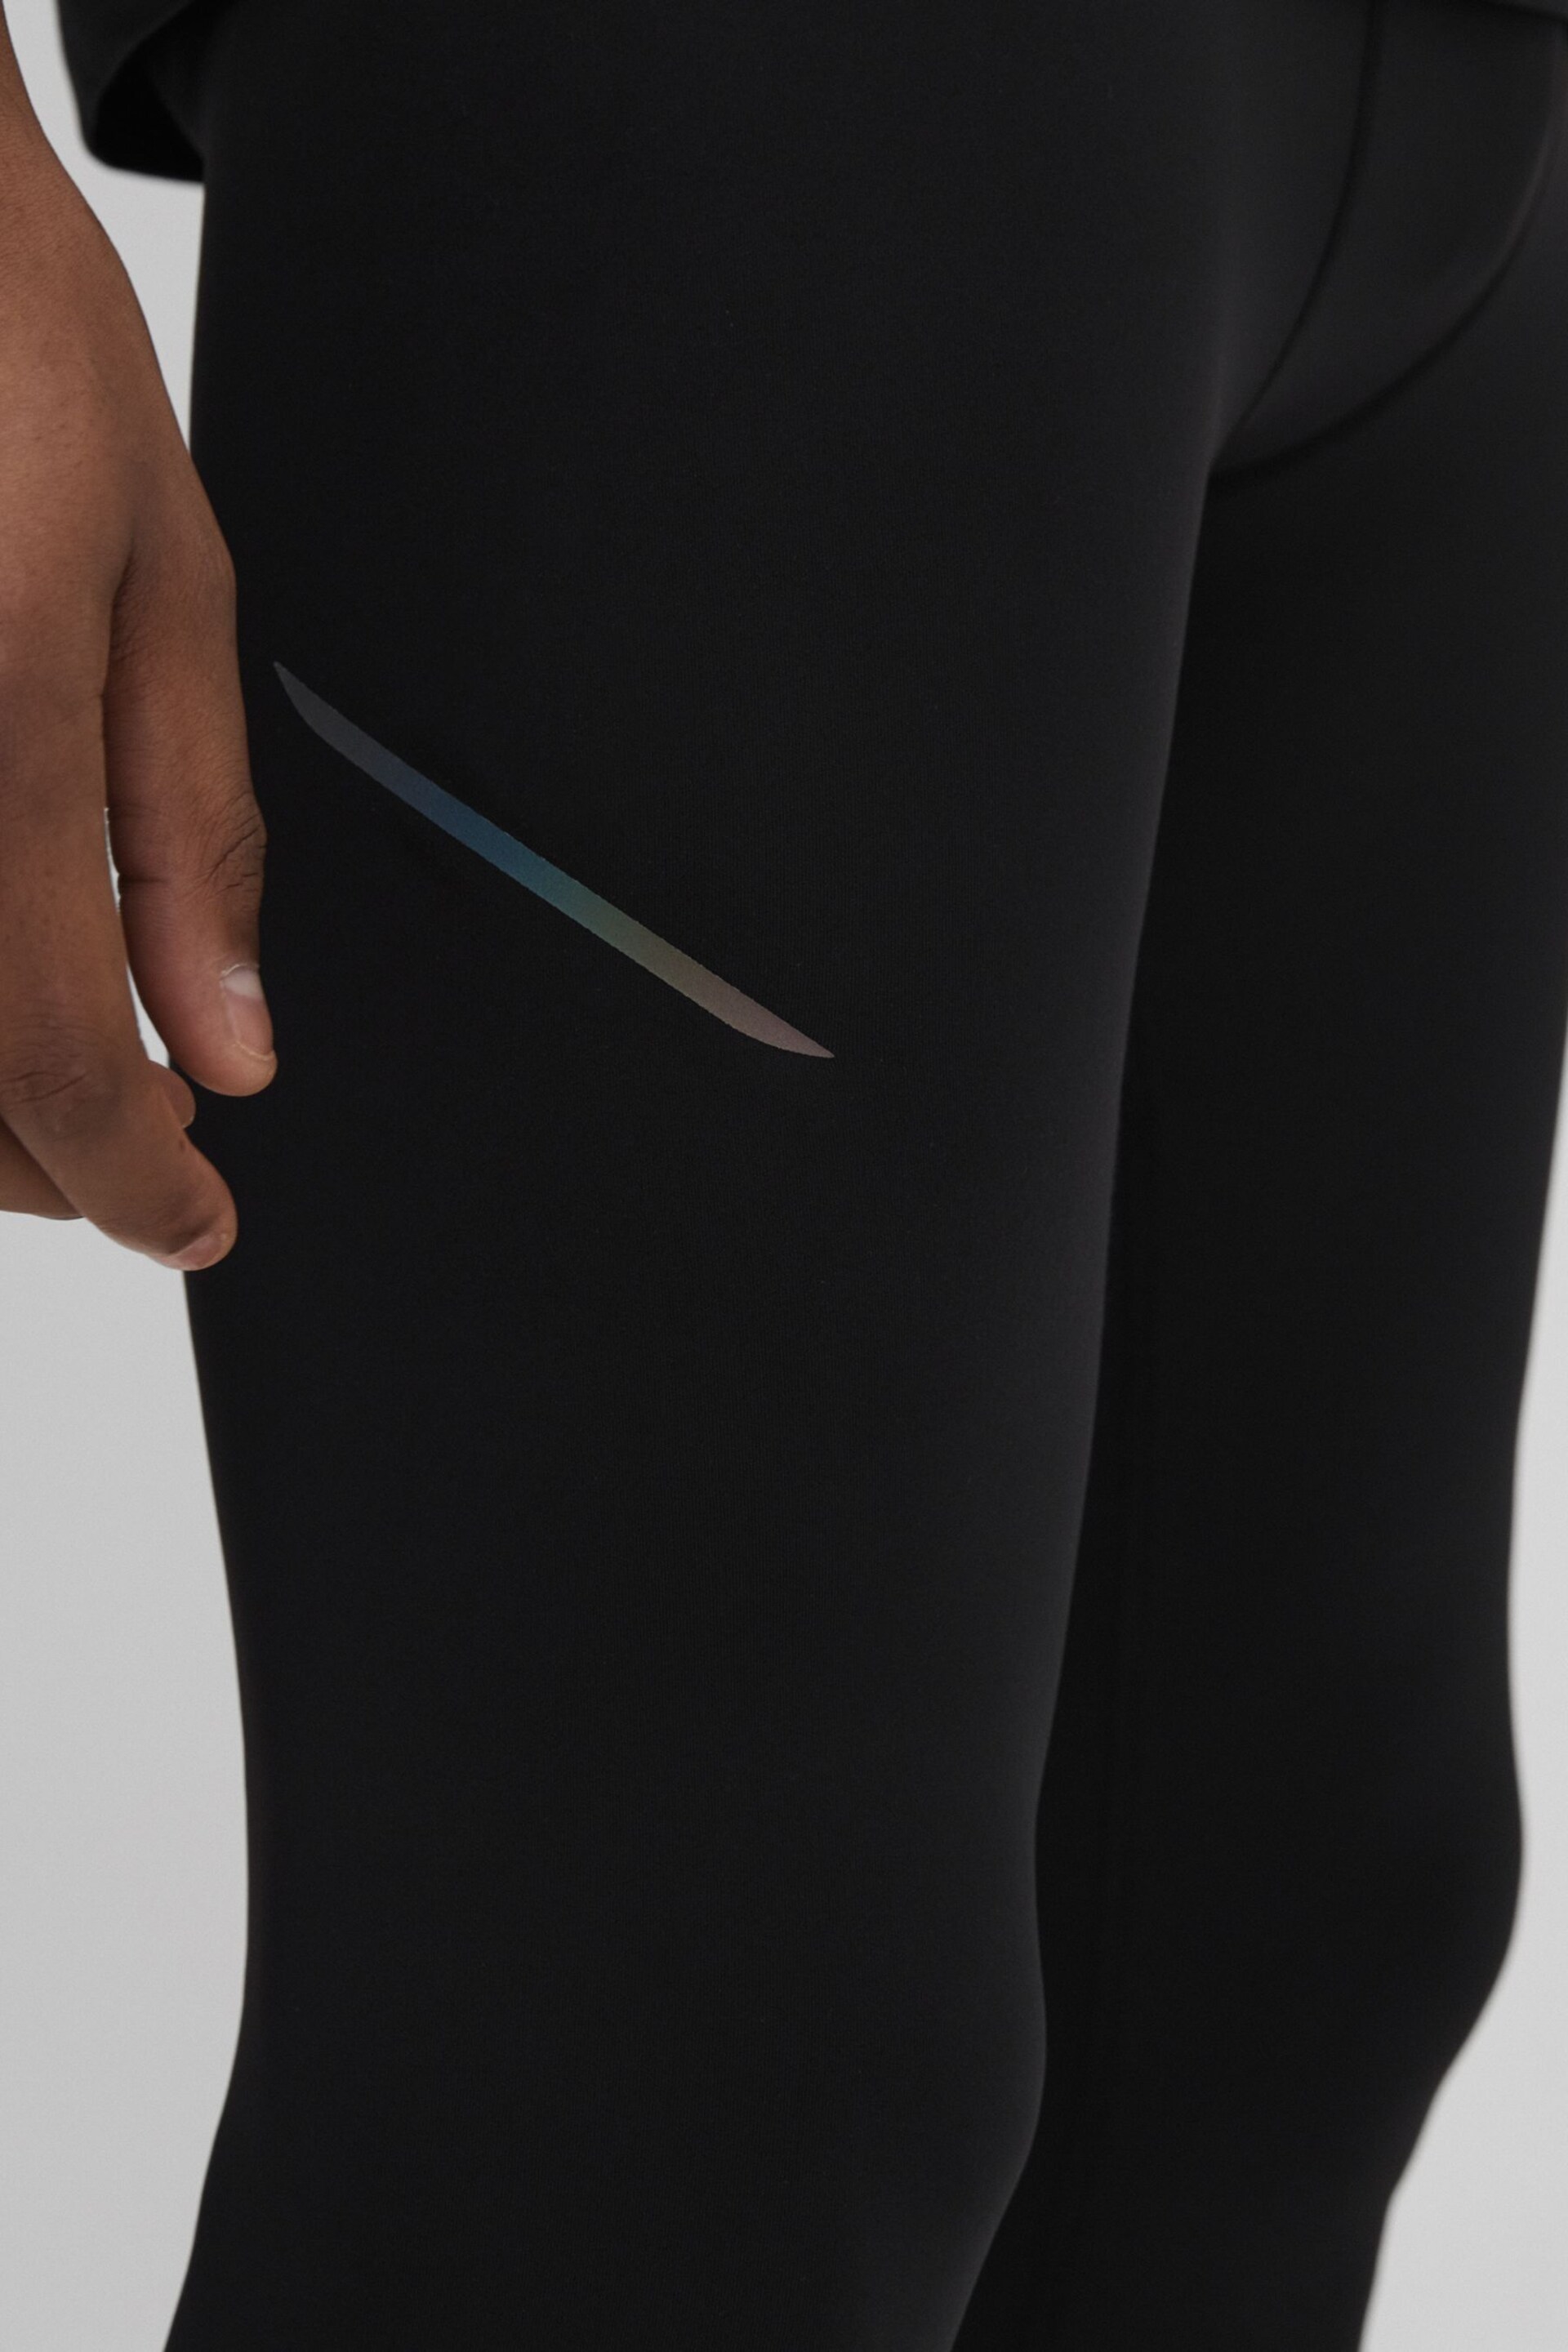 Reiss Onyx Black Holt Castore Performance Tights - Image 4 of 8